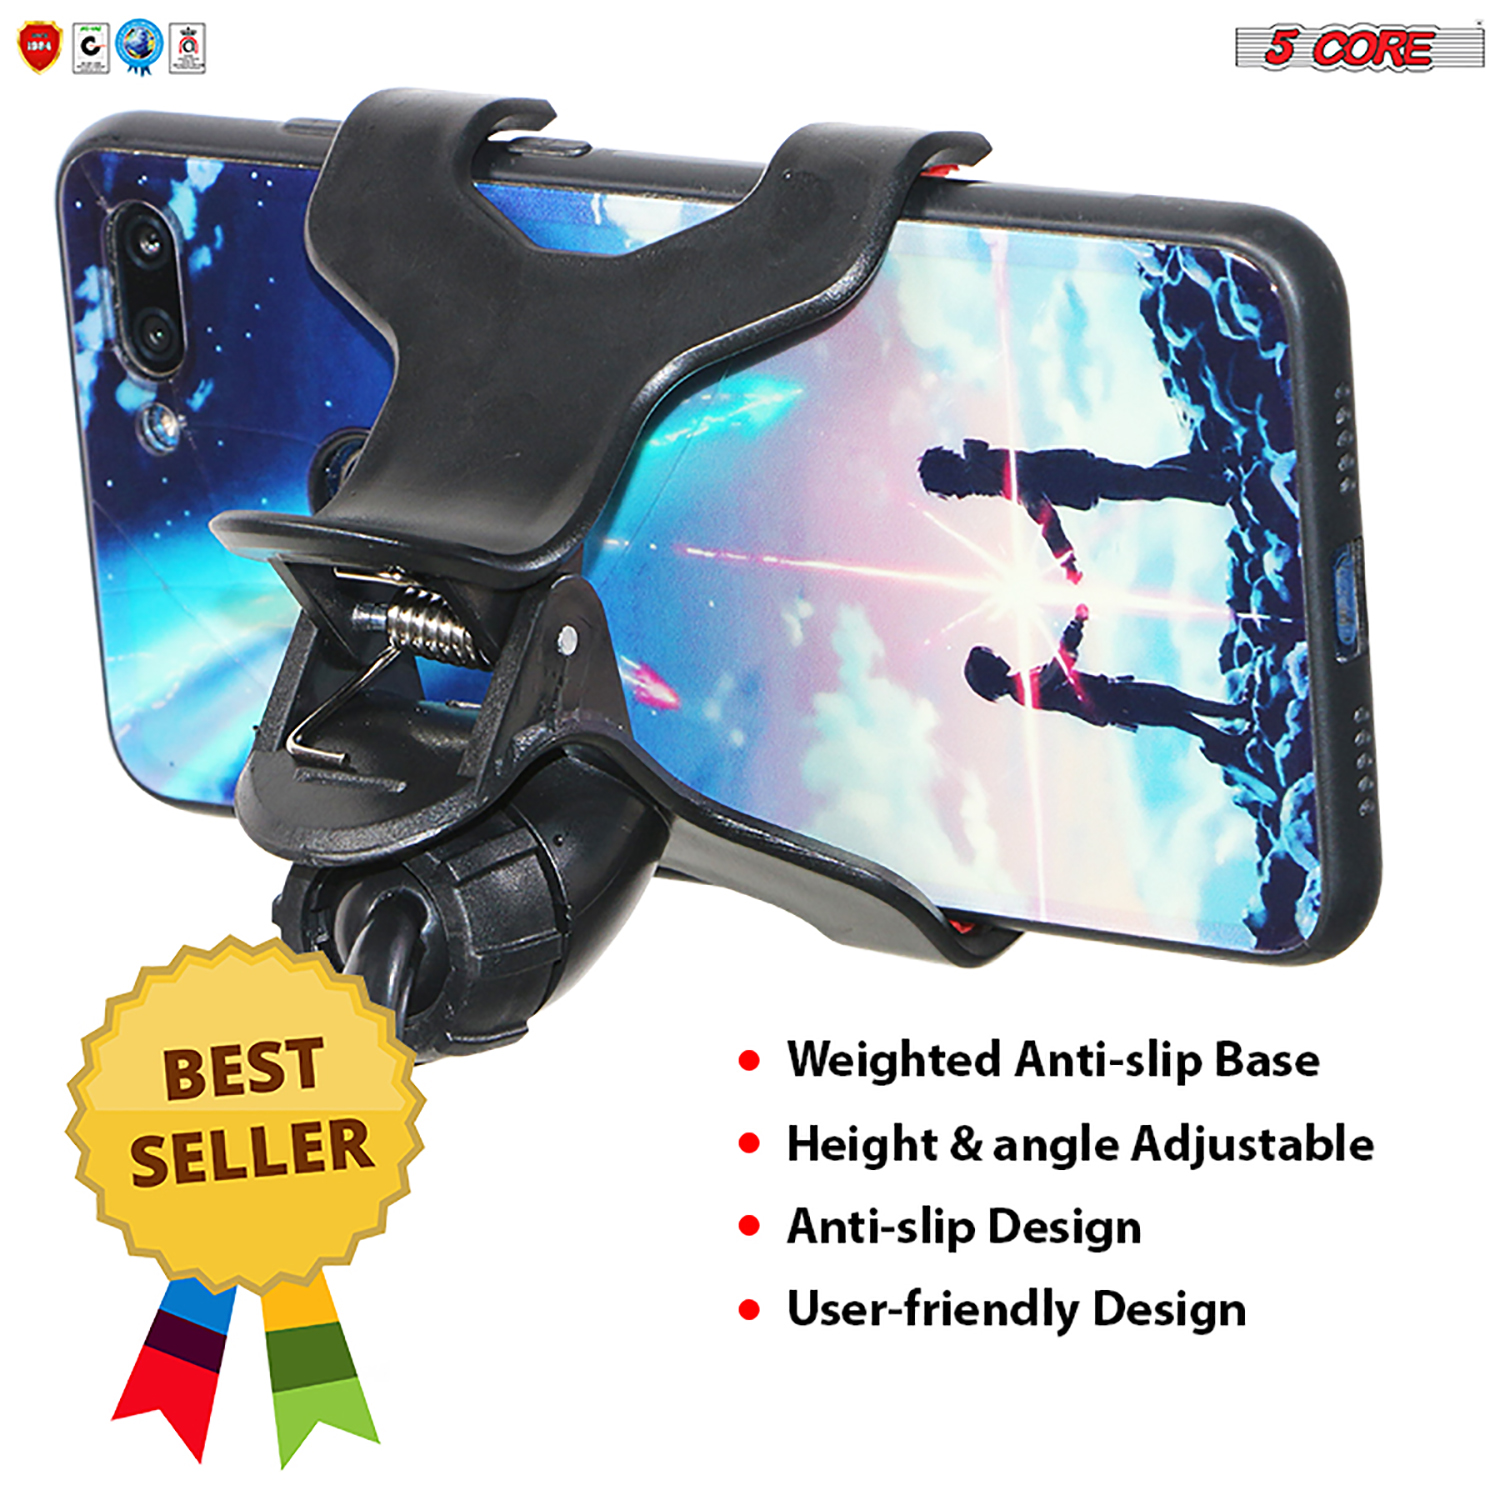 5 Core Mic Stand with Tablet and Phone Holder Adjustable Gooseneck Microphone Stand, Collapsible Tripod Boom Mic Stand